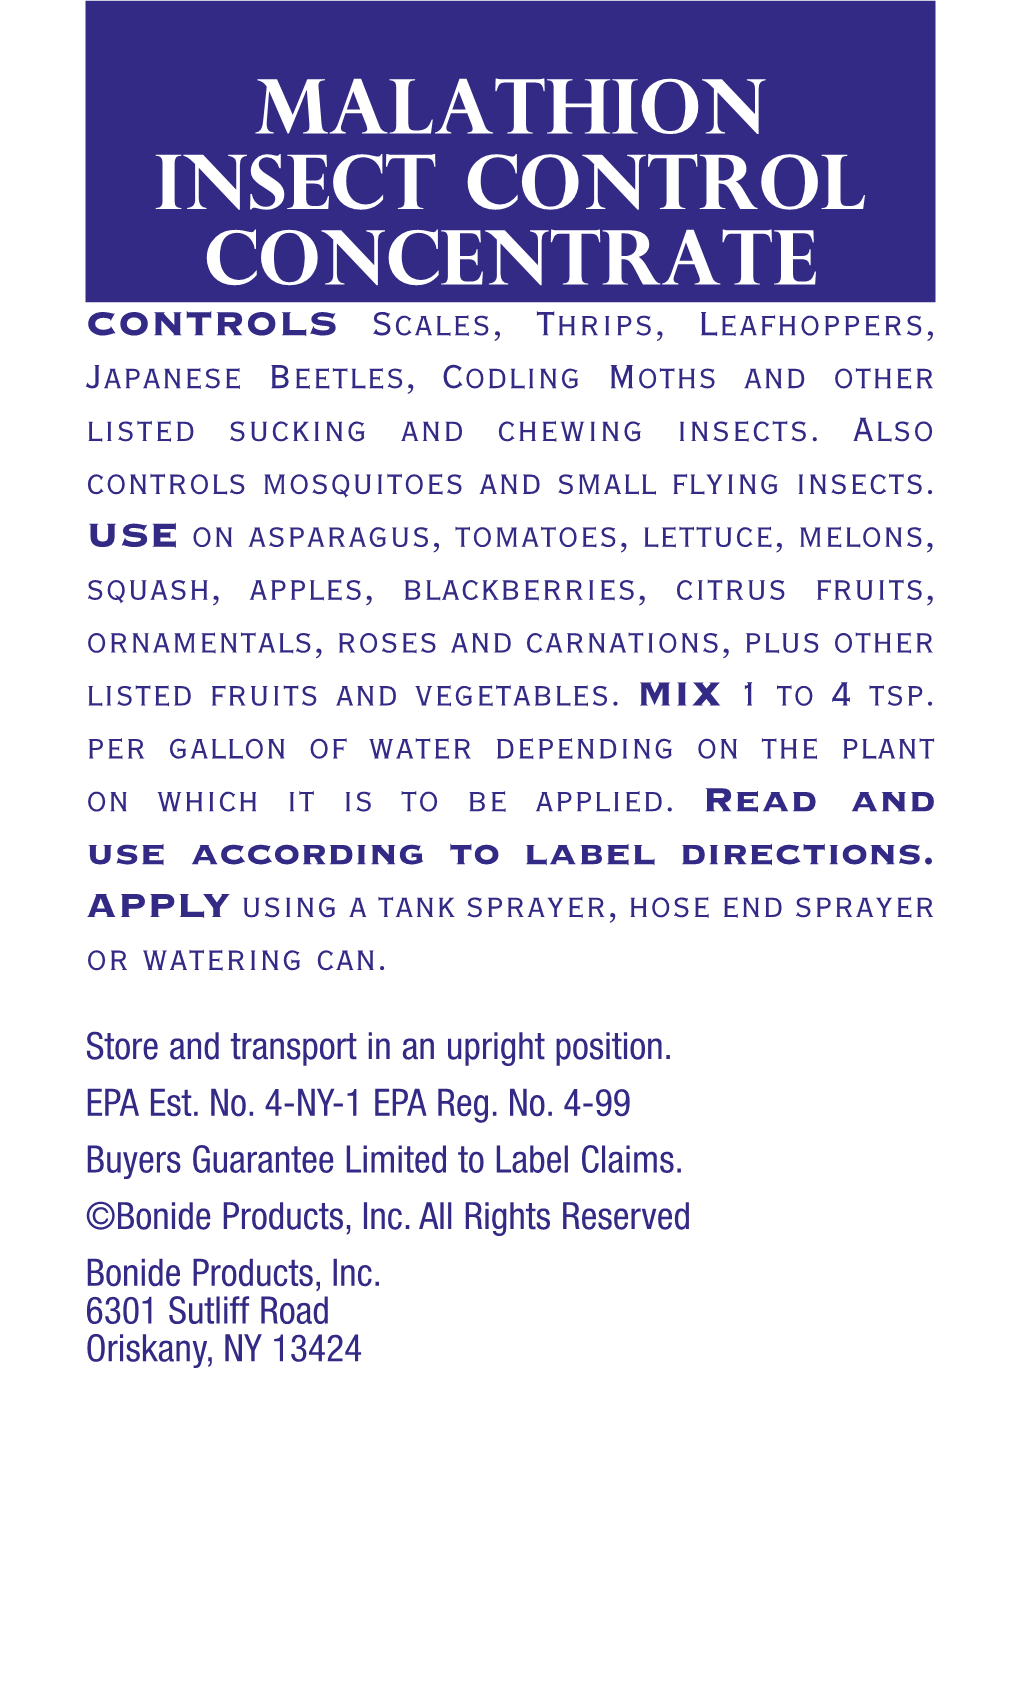 MALATHION Insect Control Concentrate CONTROLS Scales, Thrips, Leafhoppers, Japanese Beetles, Codling Moths and Other Listed Sucking and Chewing Insects